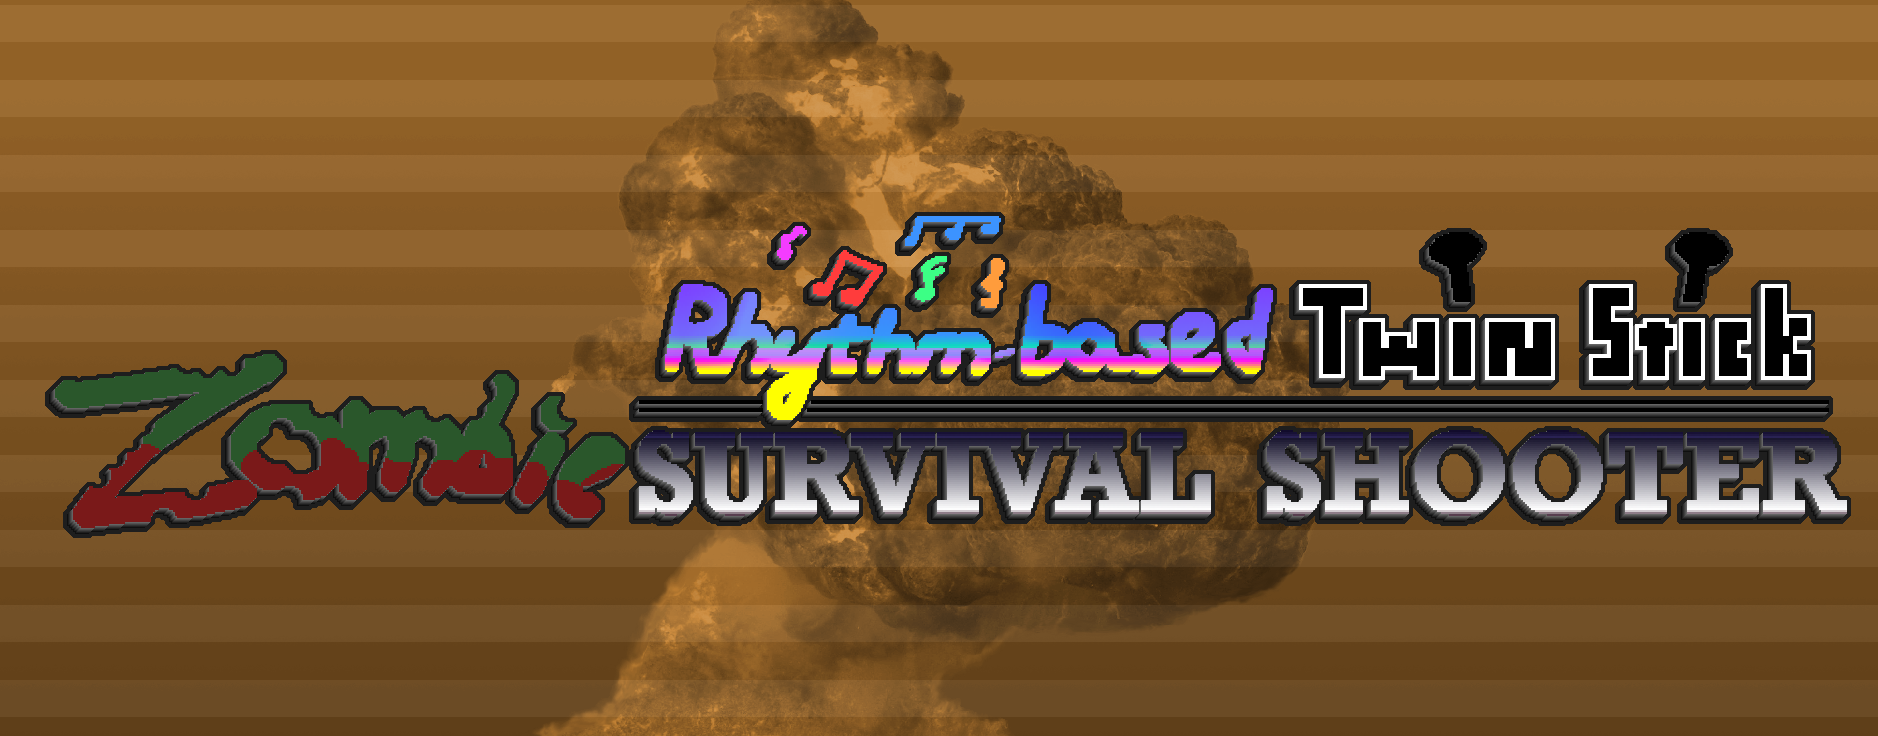 Rhythm-based Twin Stick Zombie Survival Shooter